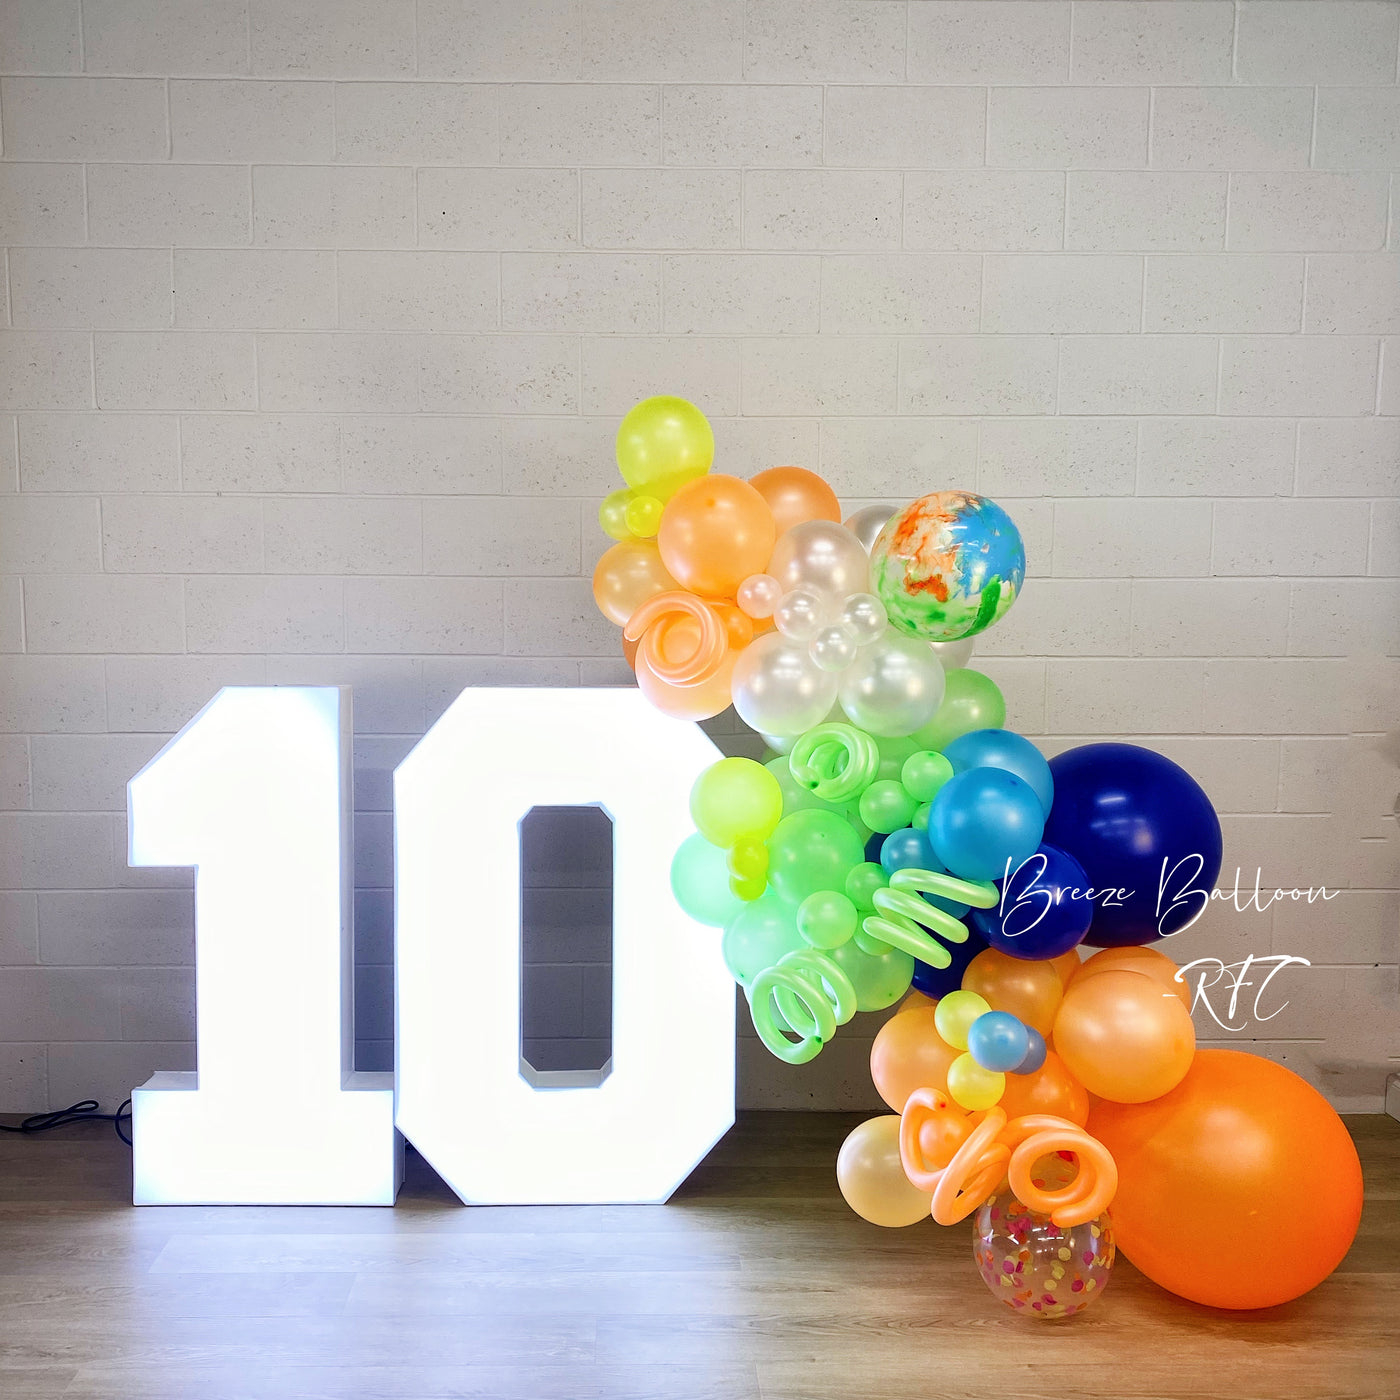 Glow in the Dark Balloon Garland for marquee numbers